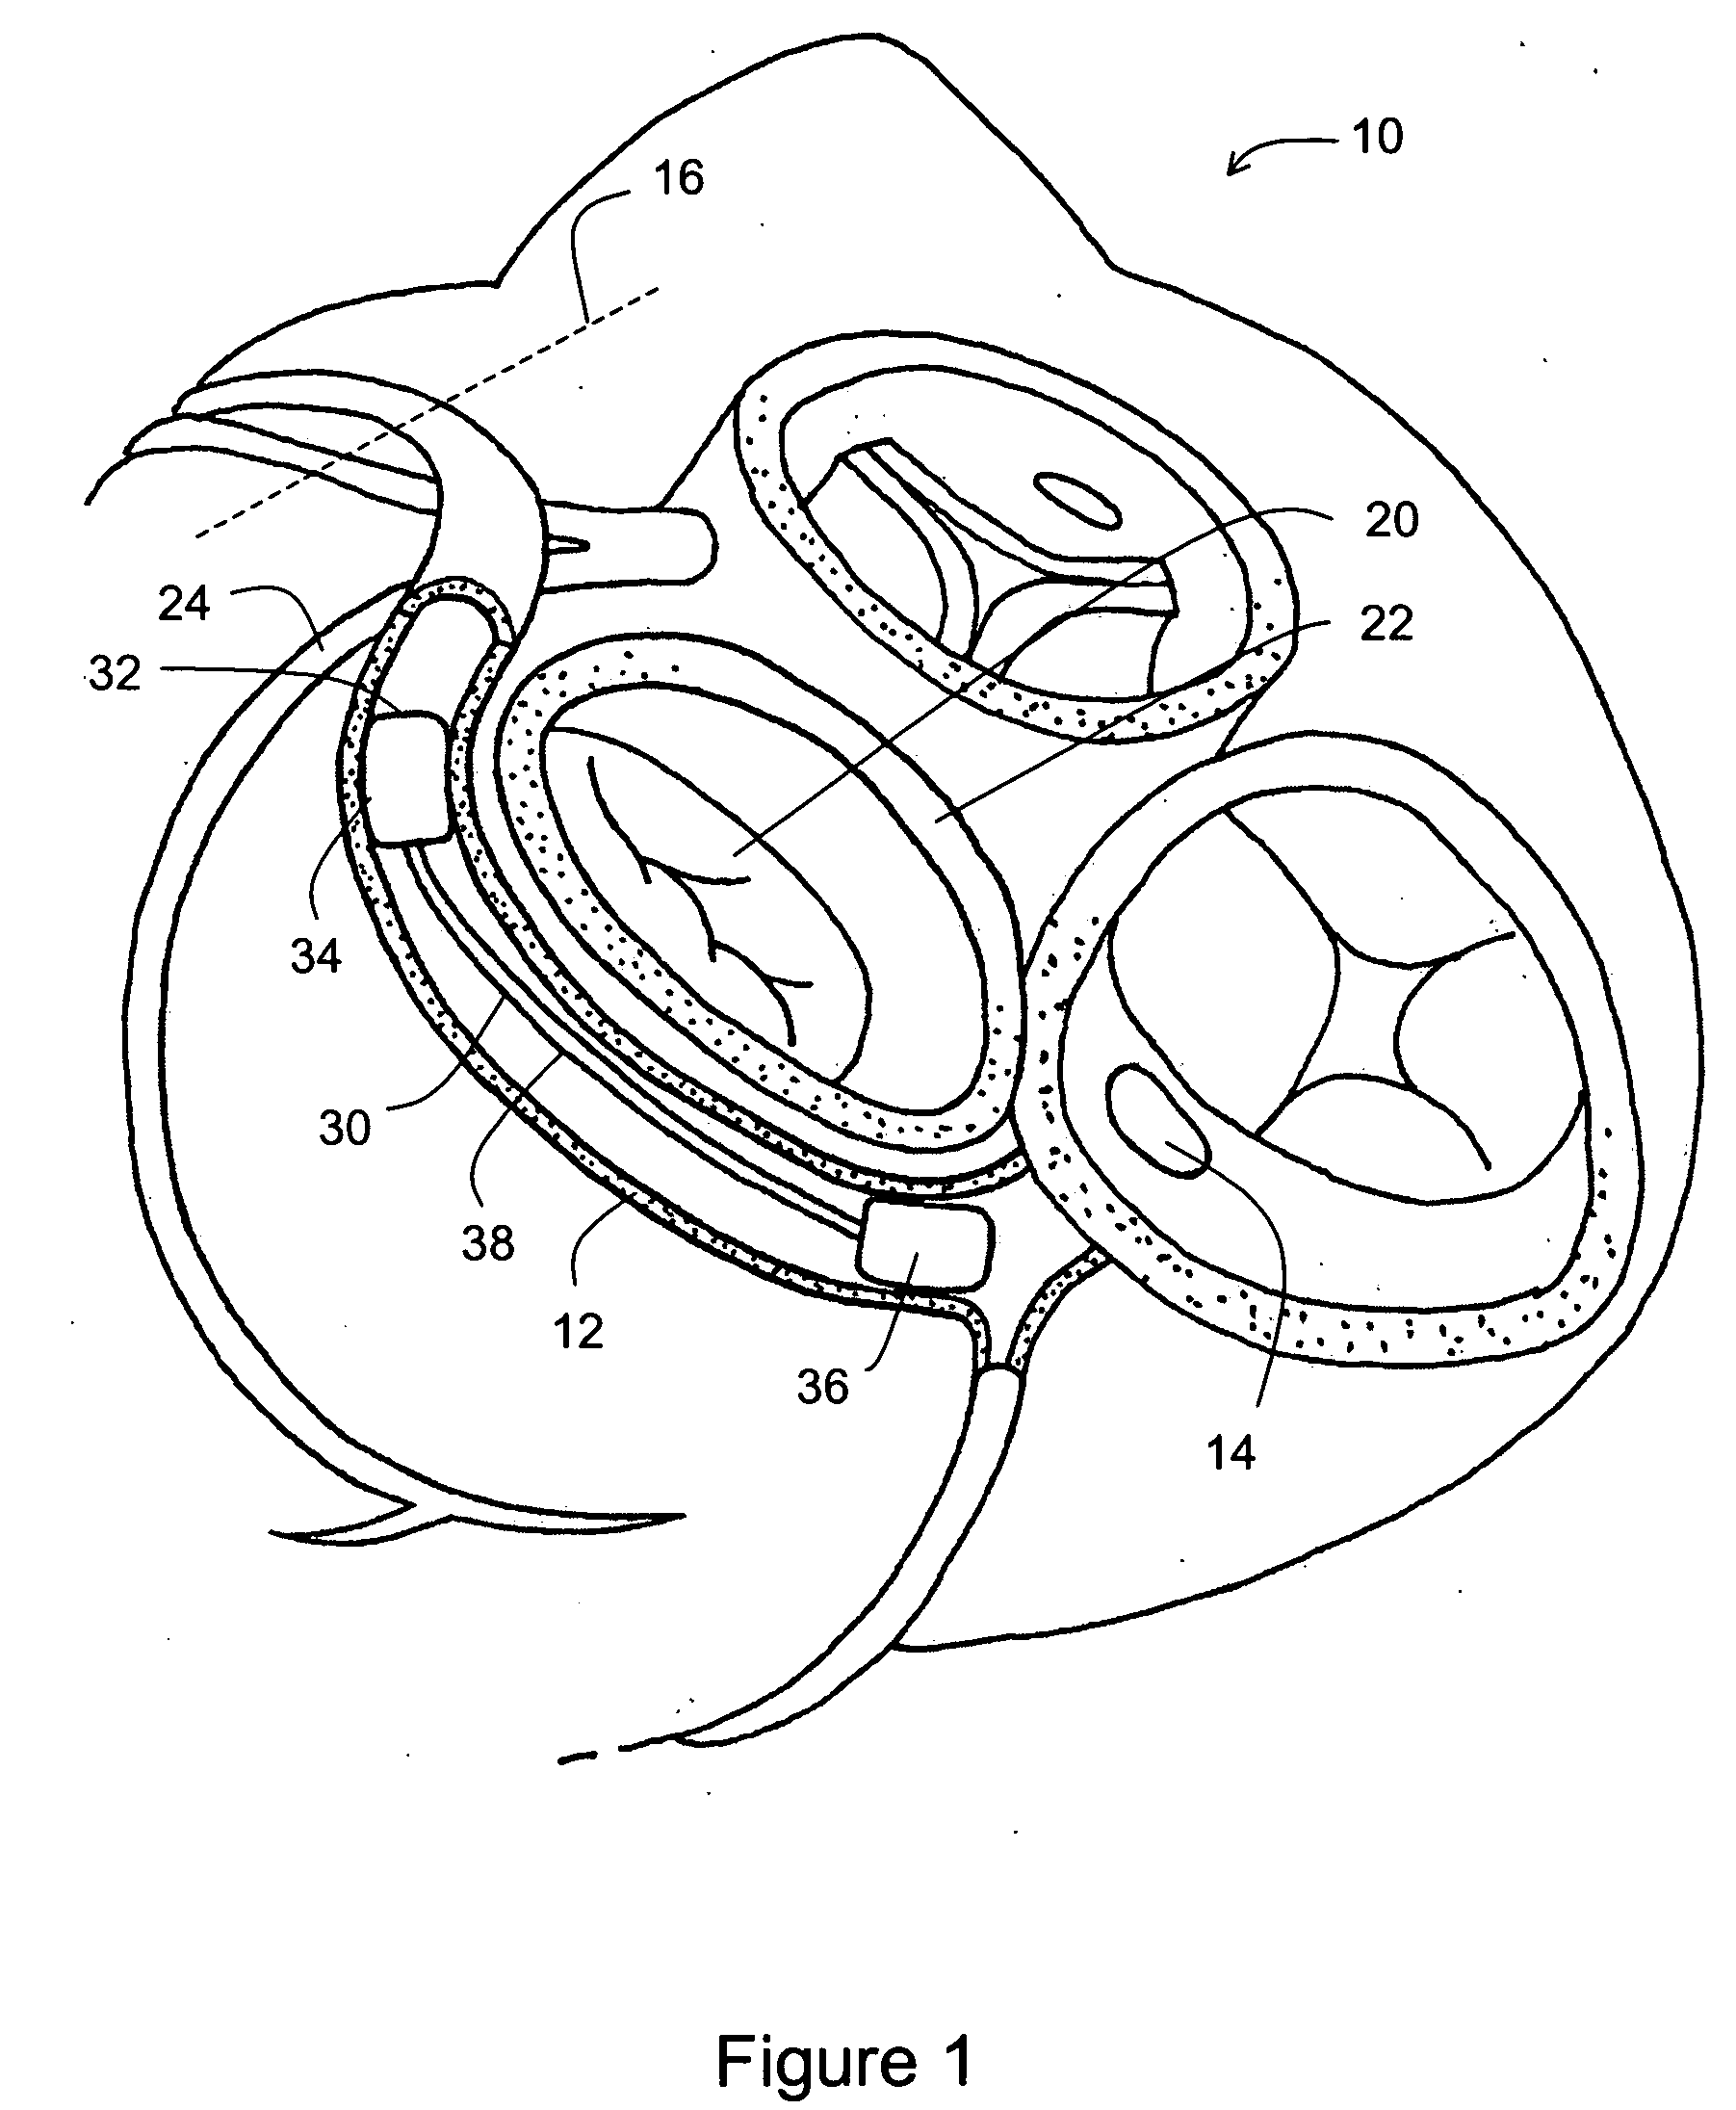 Tissue shaping device with self-expanding anchors